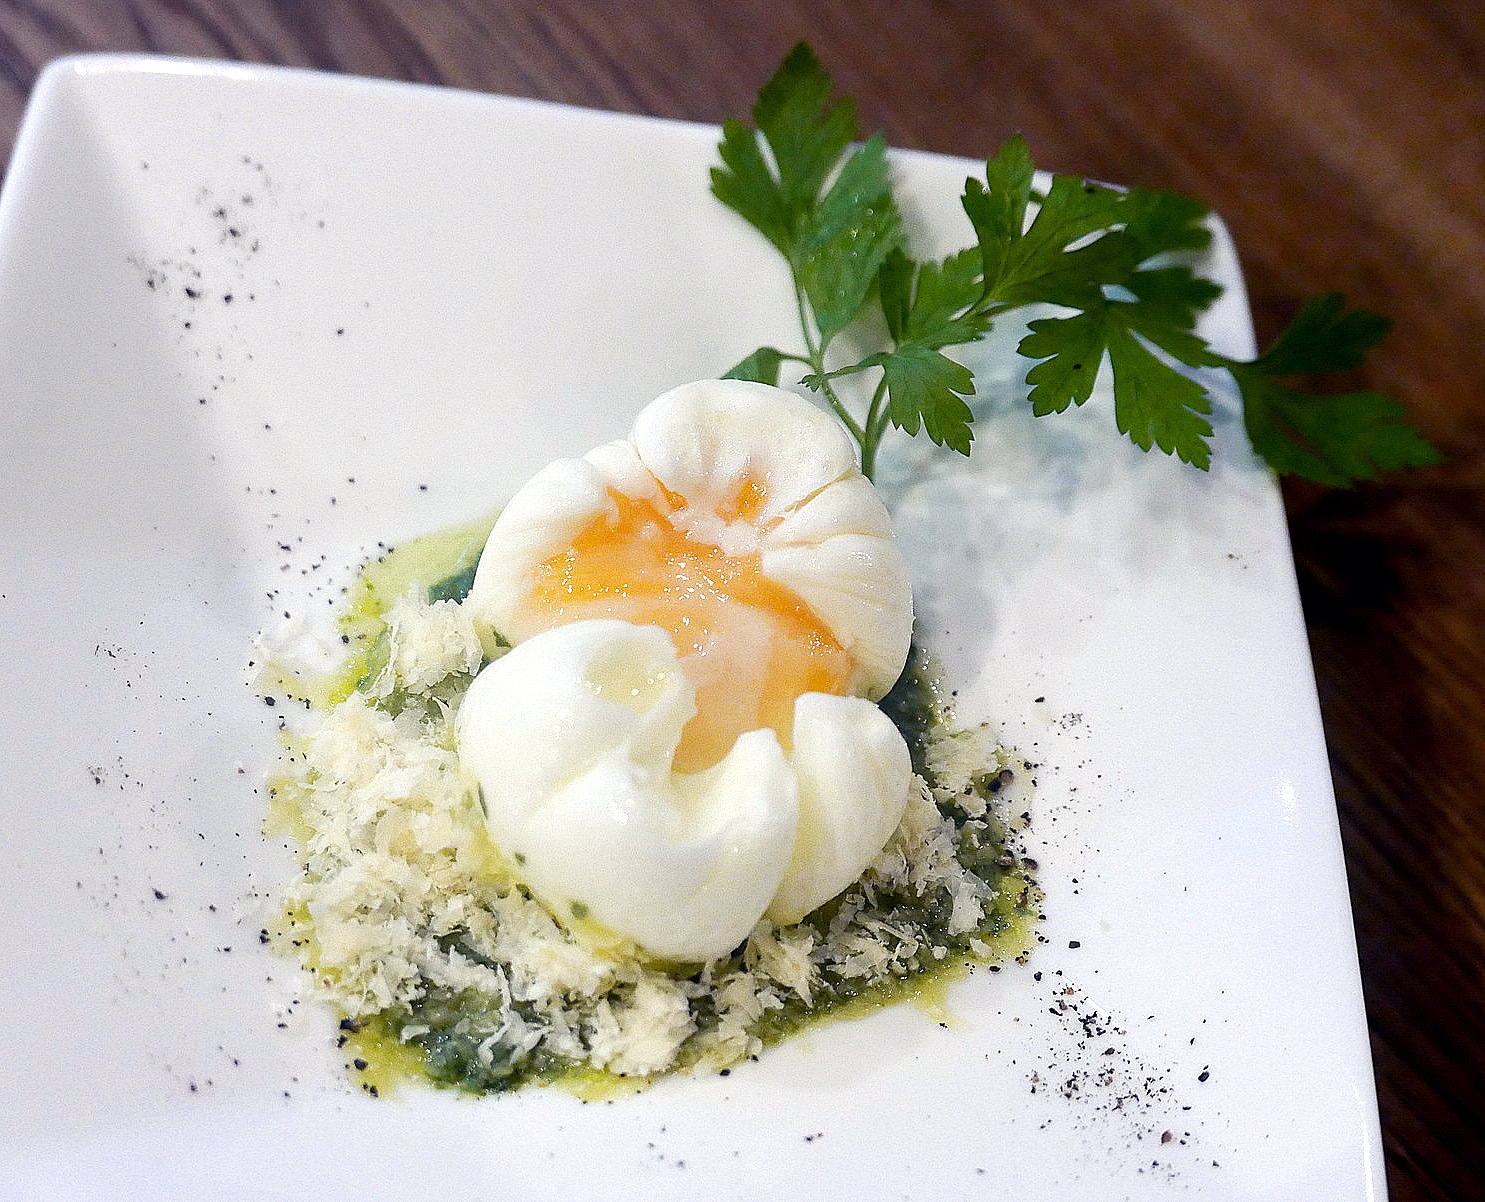 5. Poached egg with shaved cheese and pesto